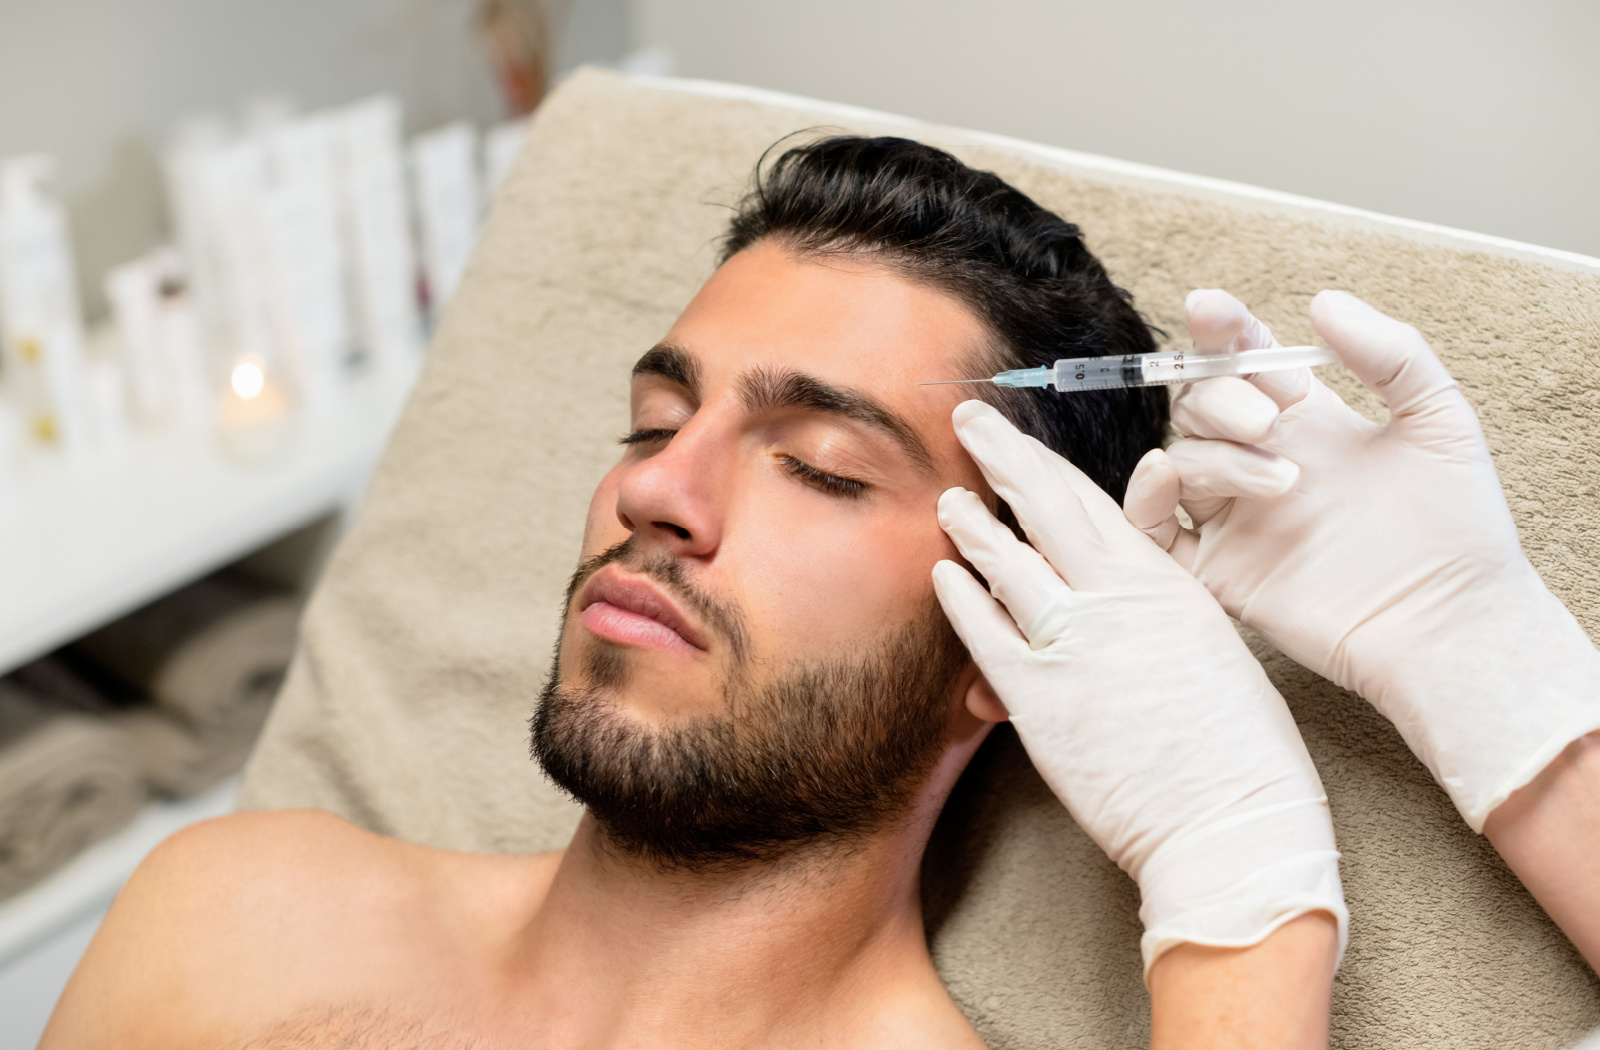 A man getting botox injected into the forehead area. 